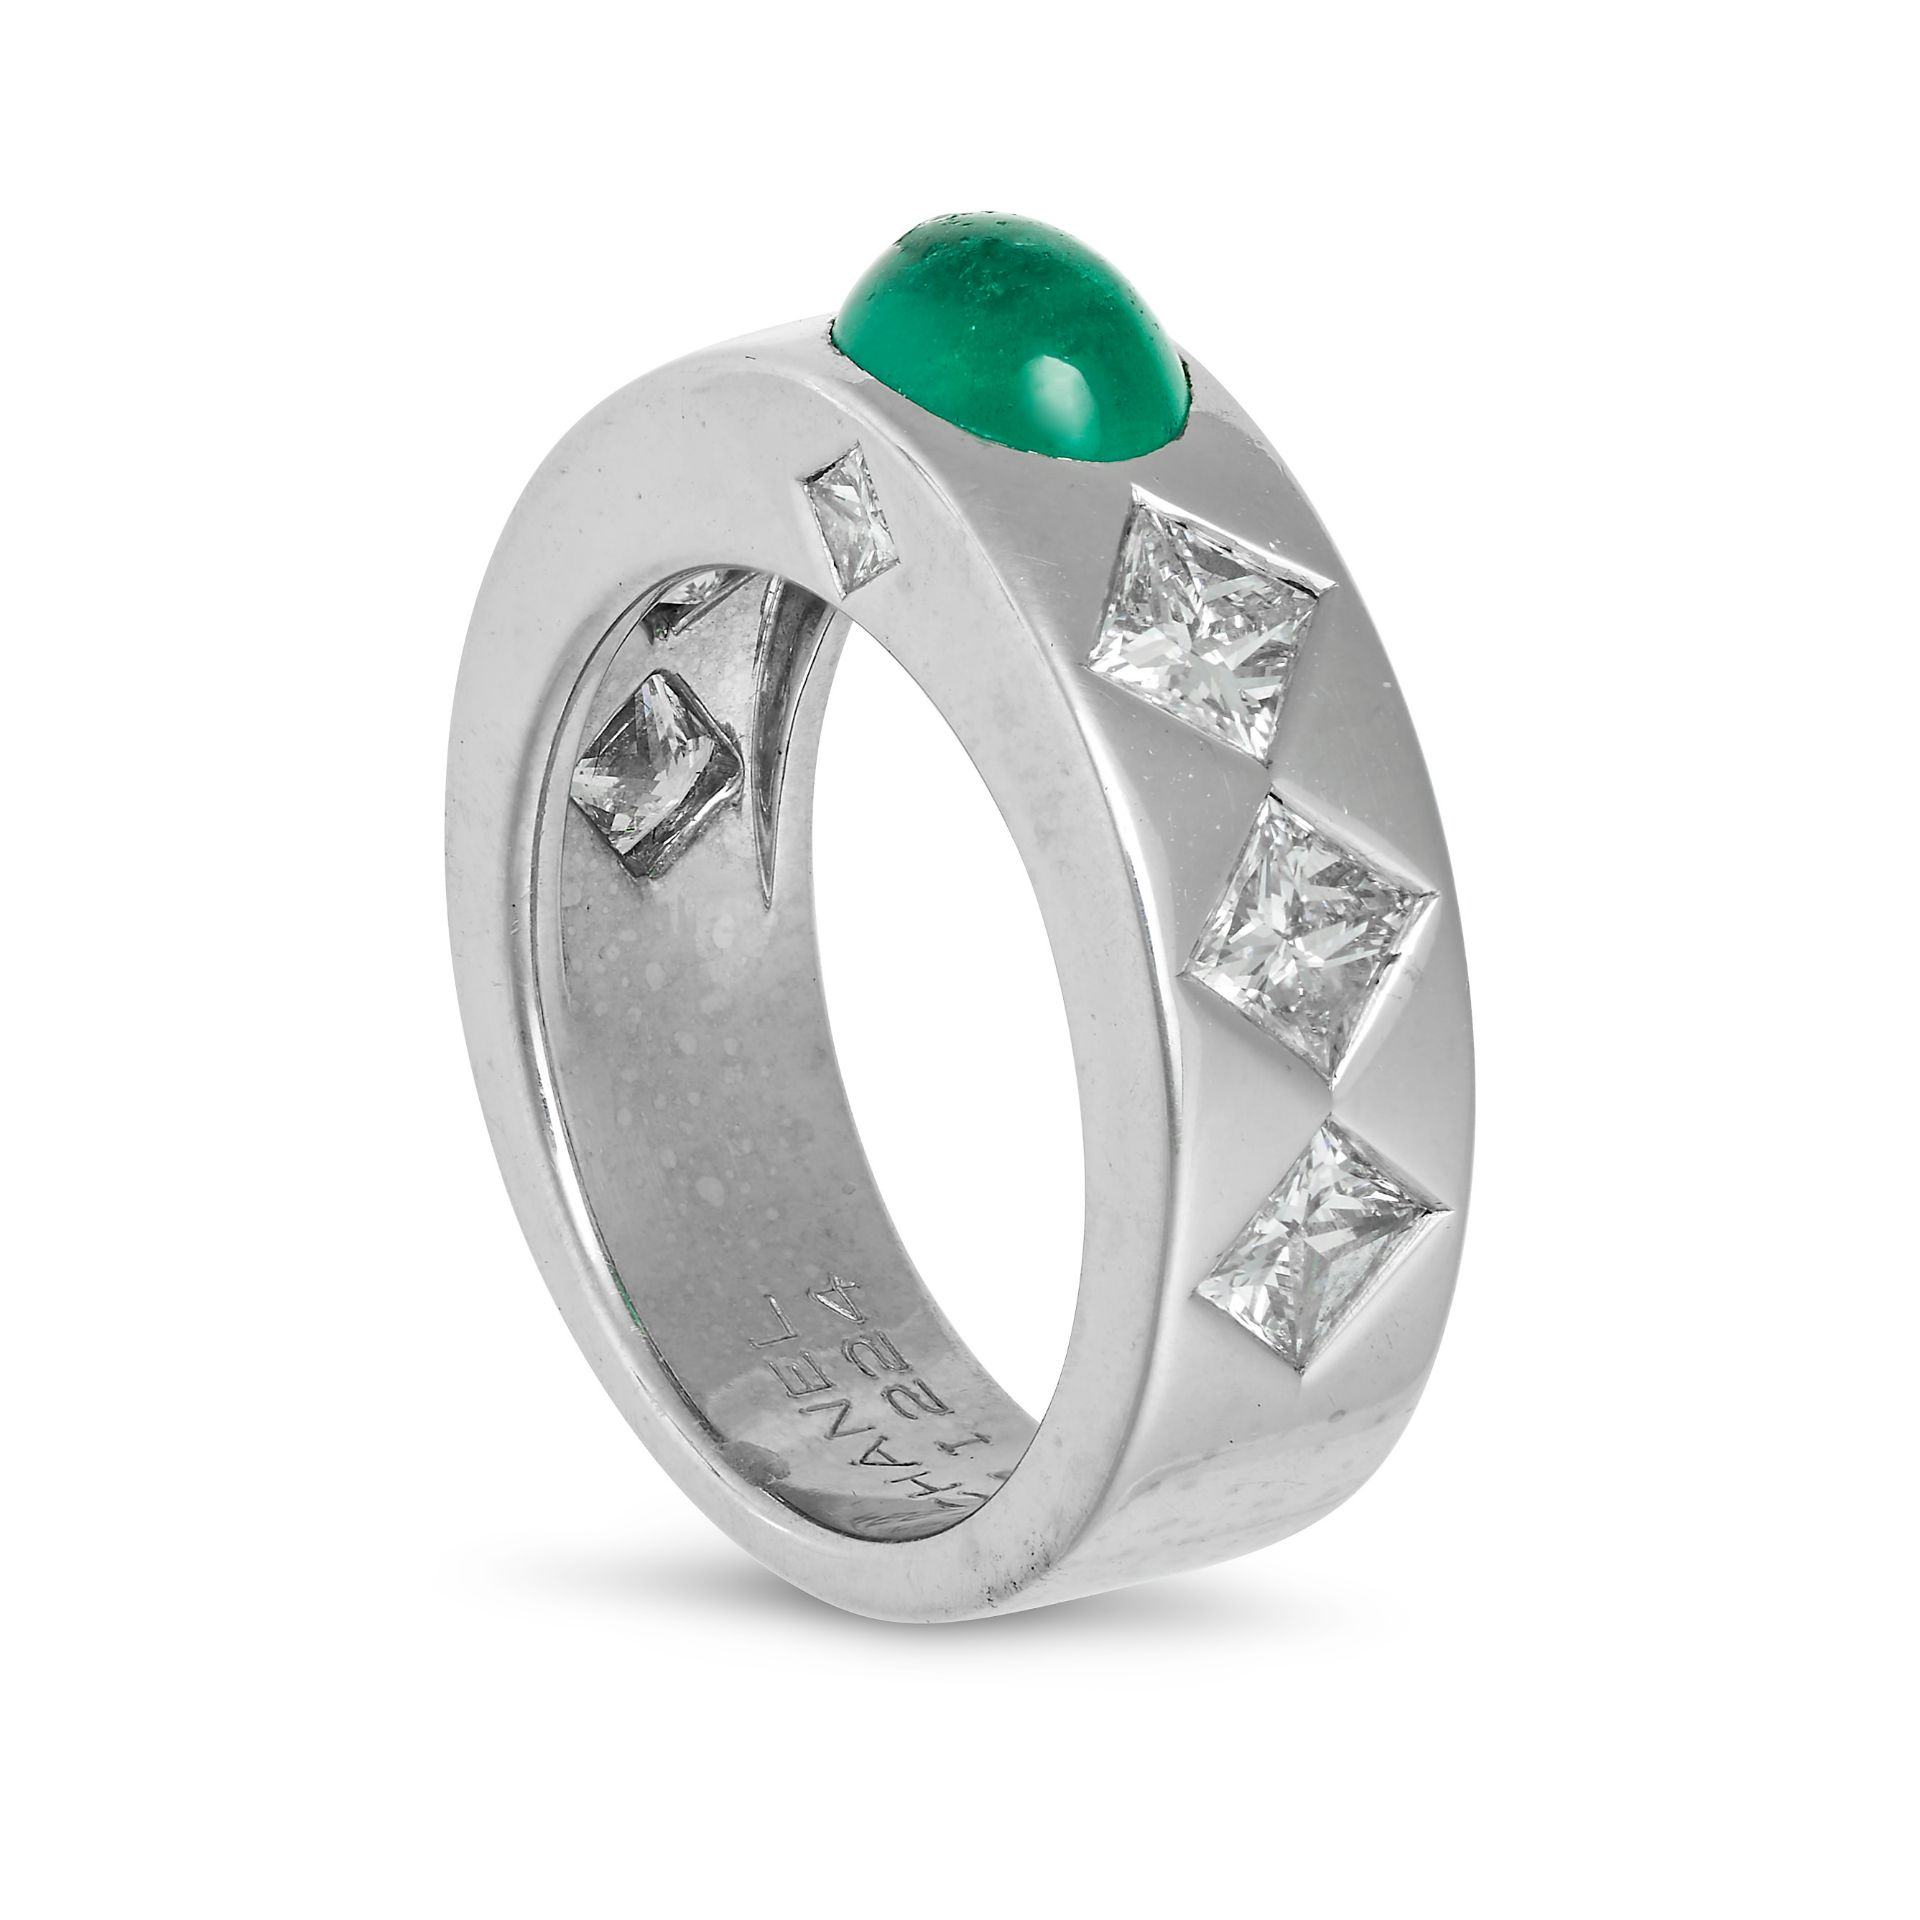 CHANEL, AN EMERALD AND DIAMOND RING in 18ct white gold, set with an oval cabochon emerald accente... - Image 2 of 2